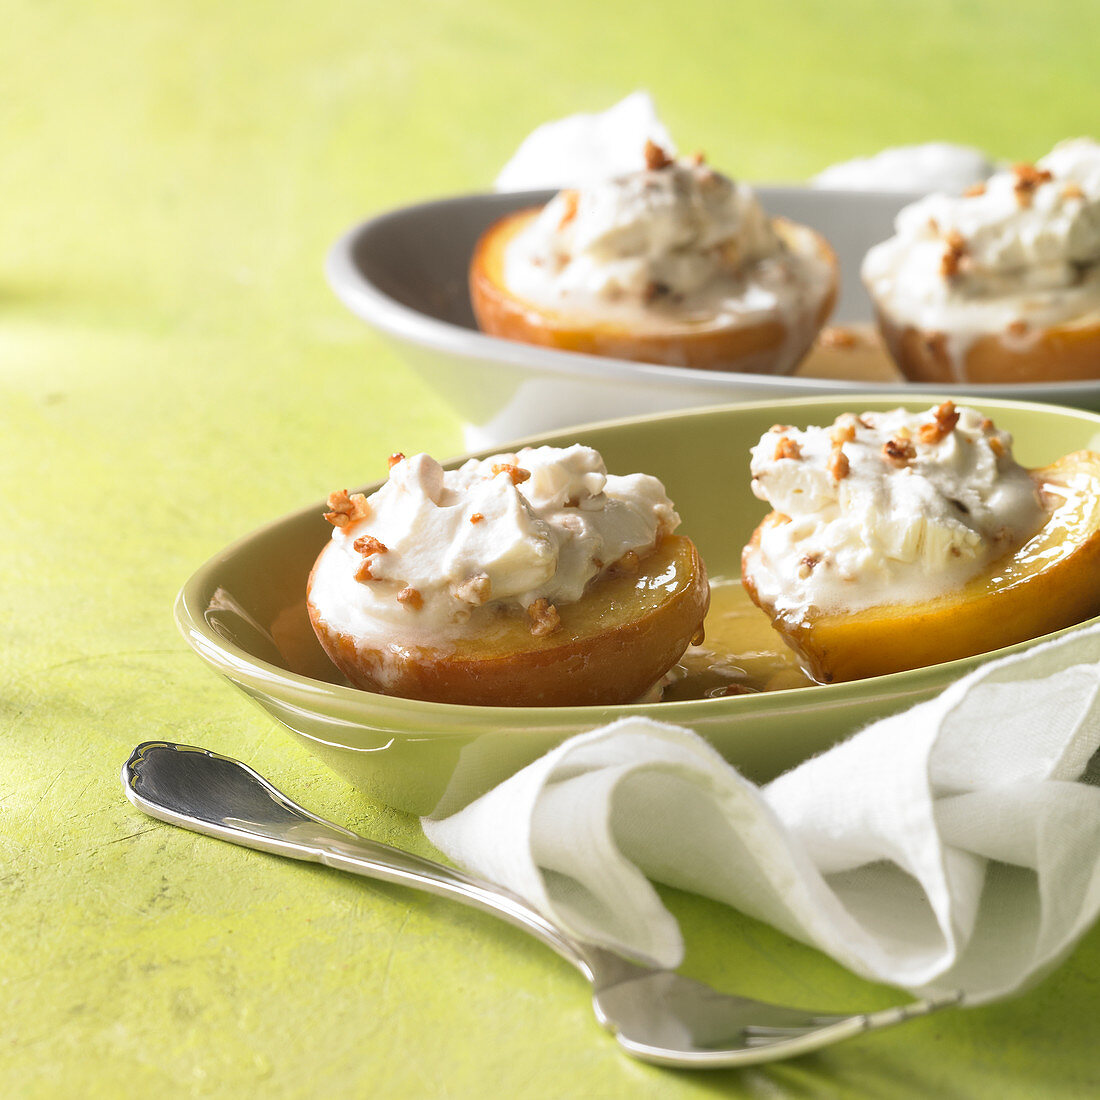 Oven-roasted peaches with cream and roasted walnuts